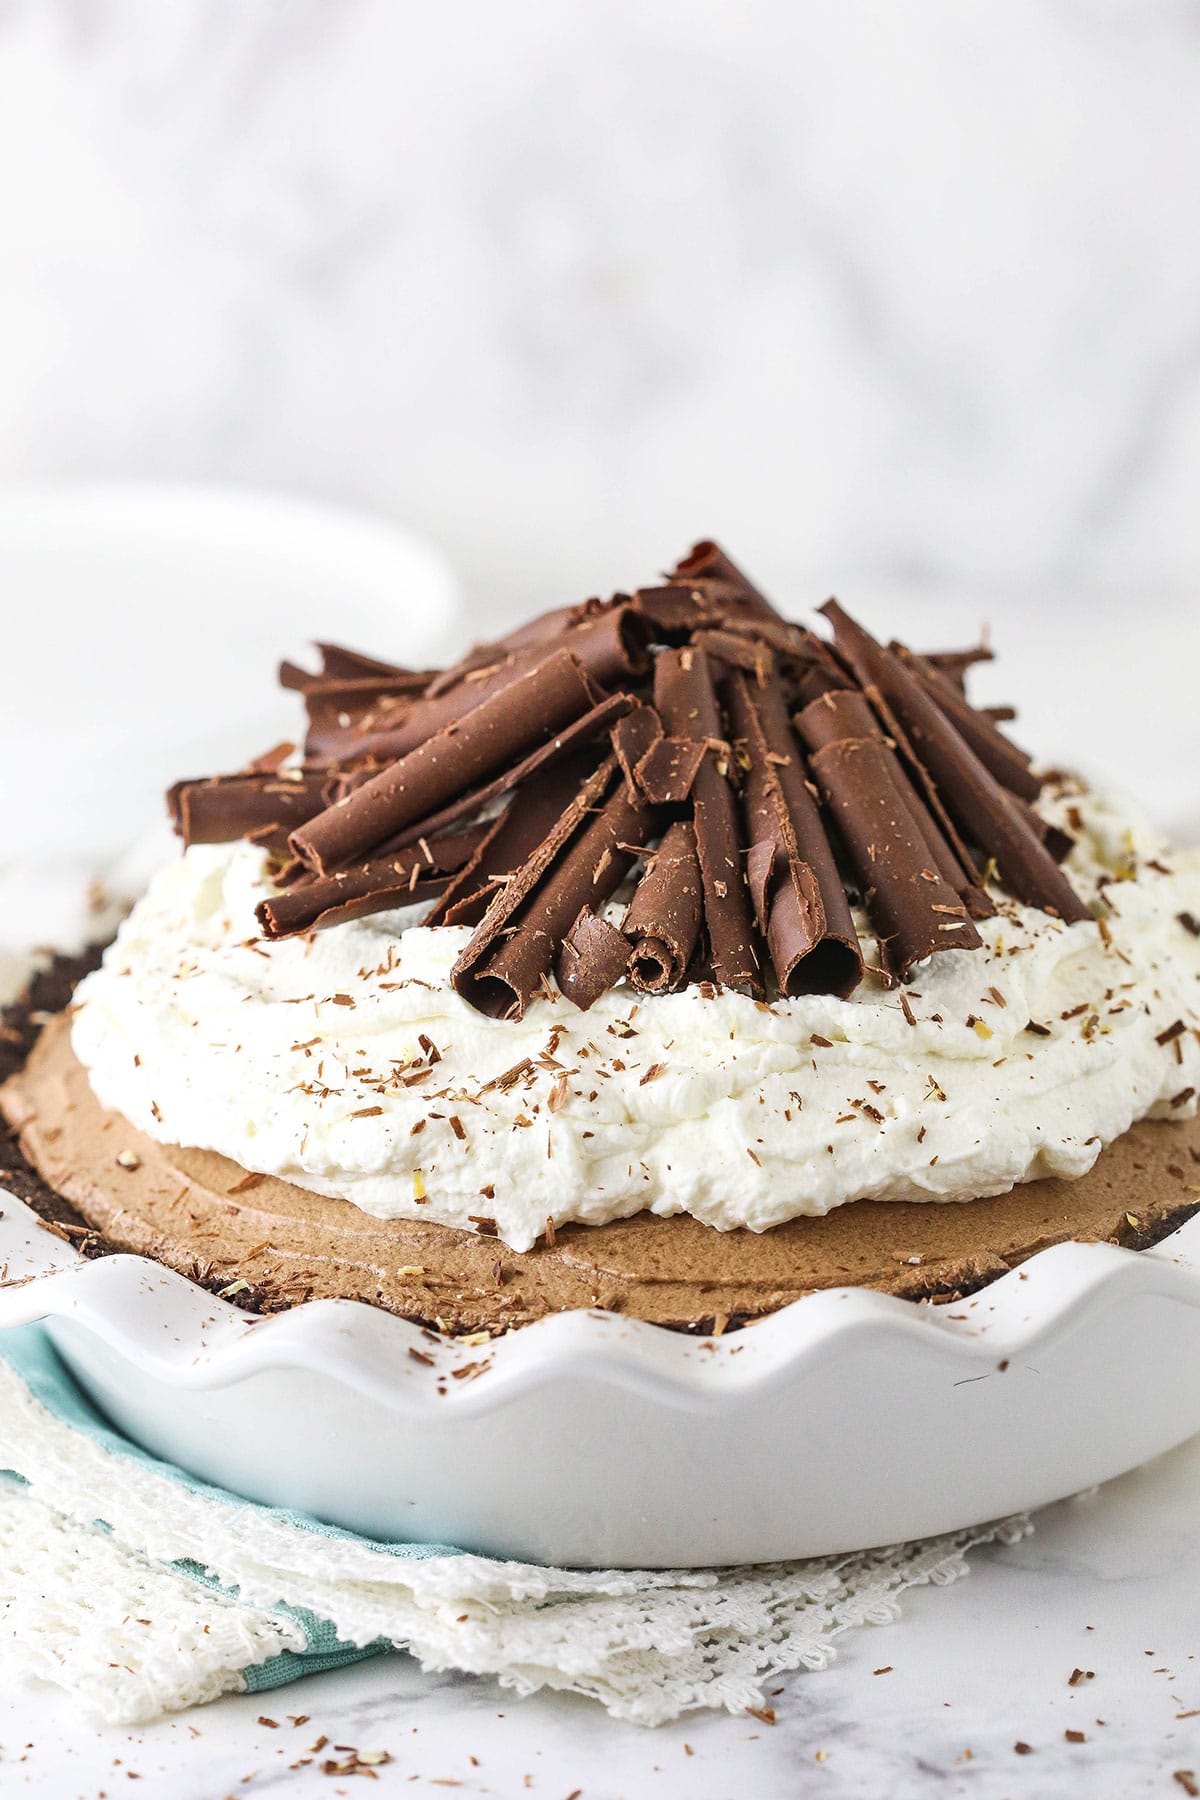 french silk pie with chocolate curls on top on a teal napkin with lace border